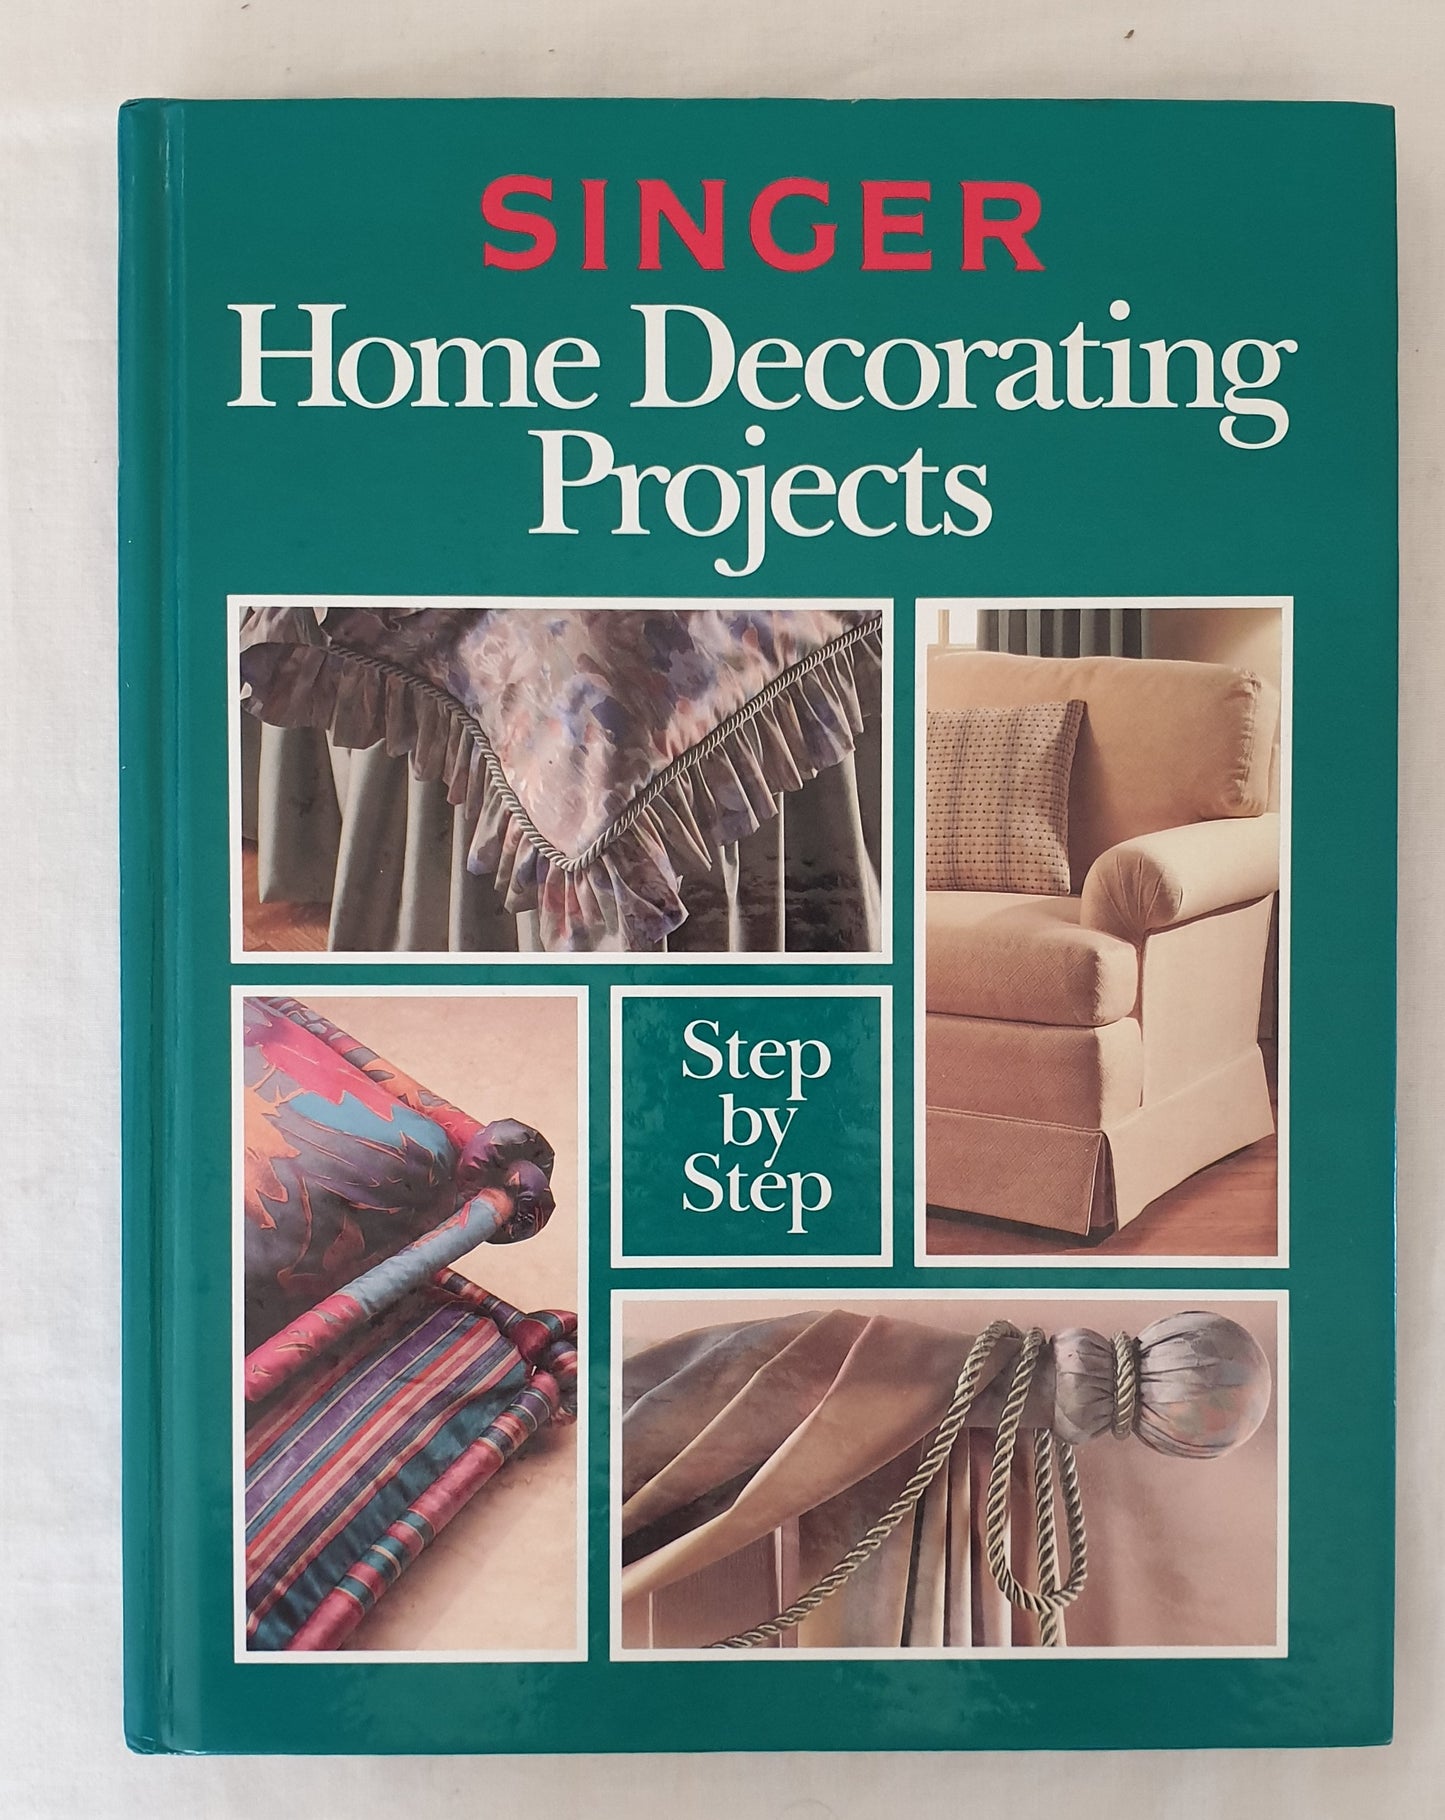 Singer: Home Decorating Projects Step-by-Step